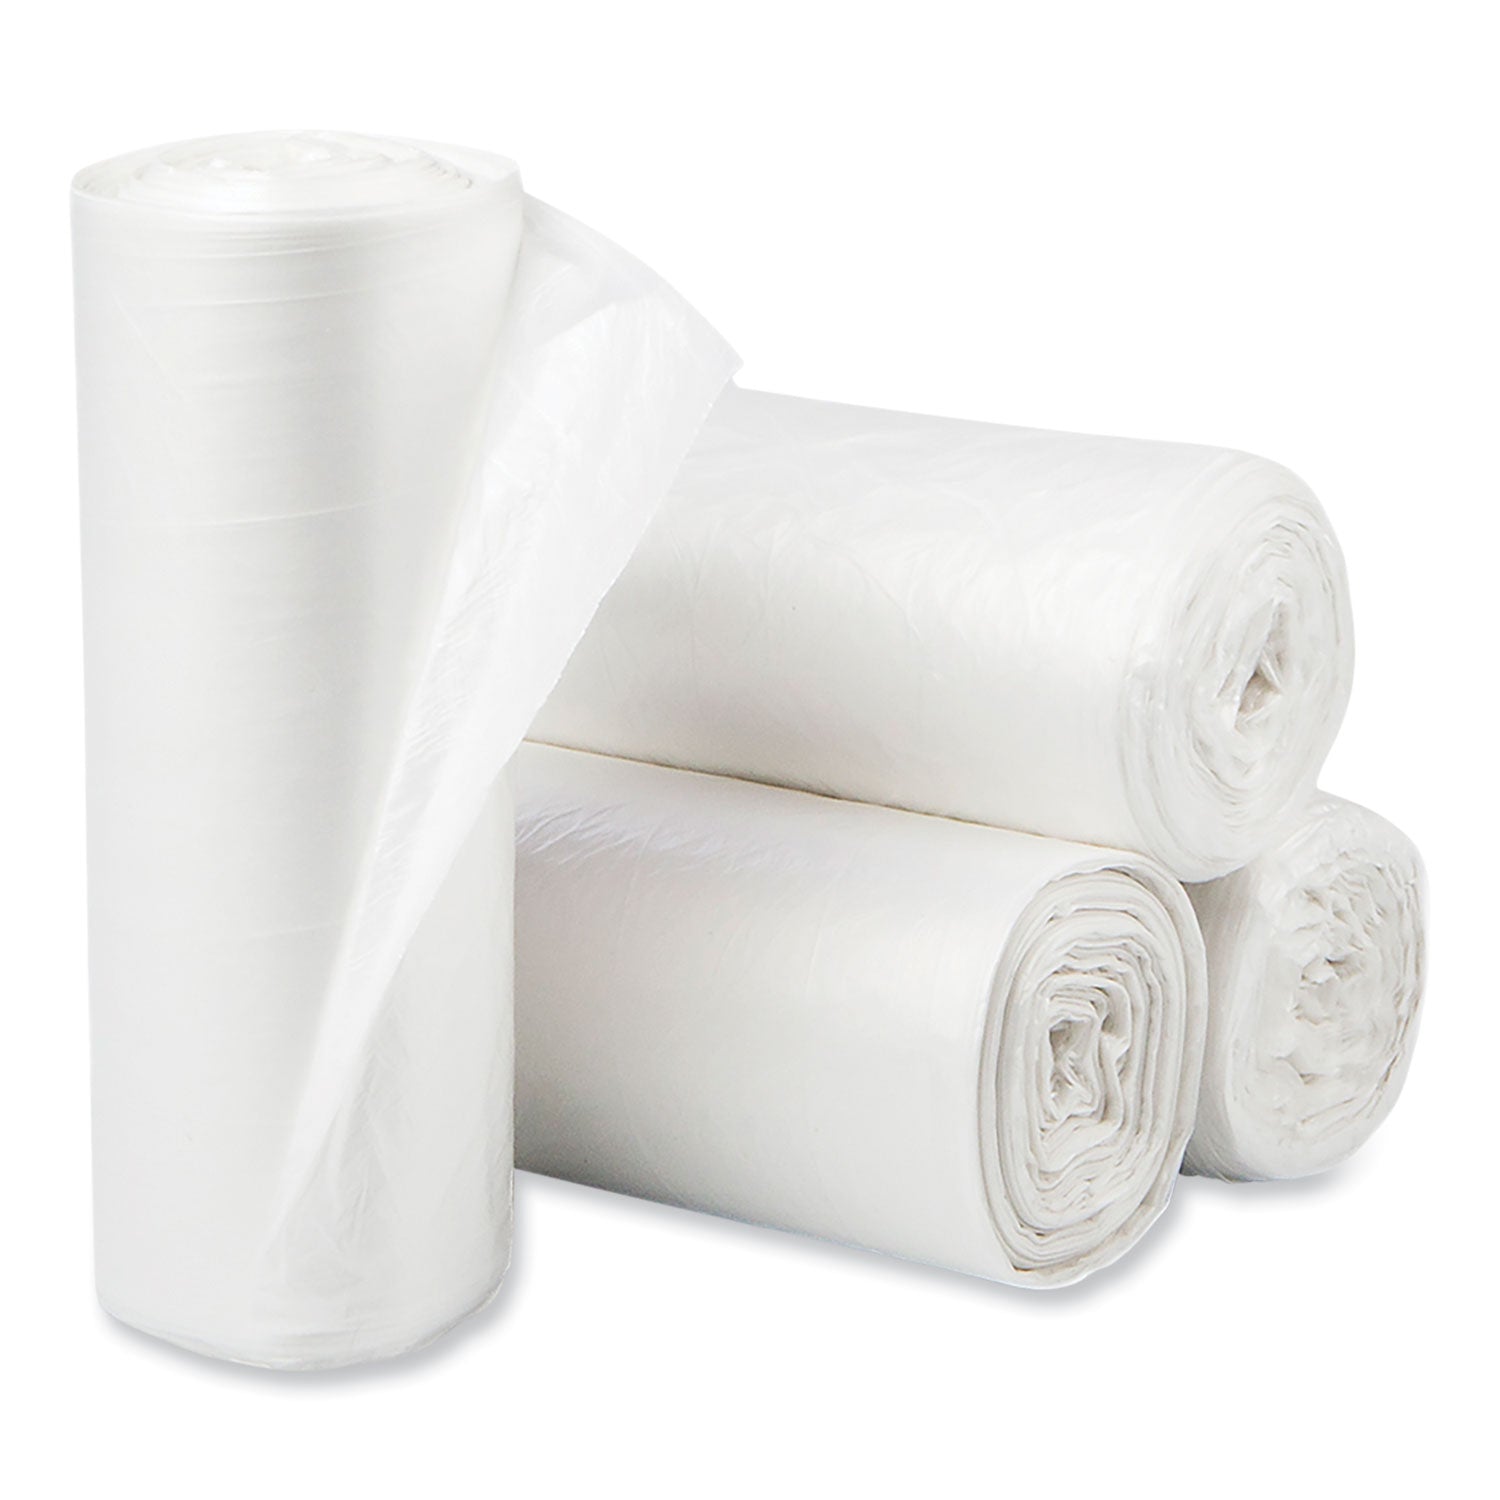 eco-strong-plus-can-liners-60-gal-16-mic-38-x-58-natural-200-carton_pitpcrh385816n - 2